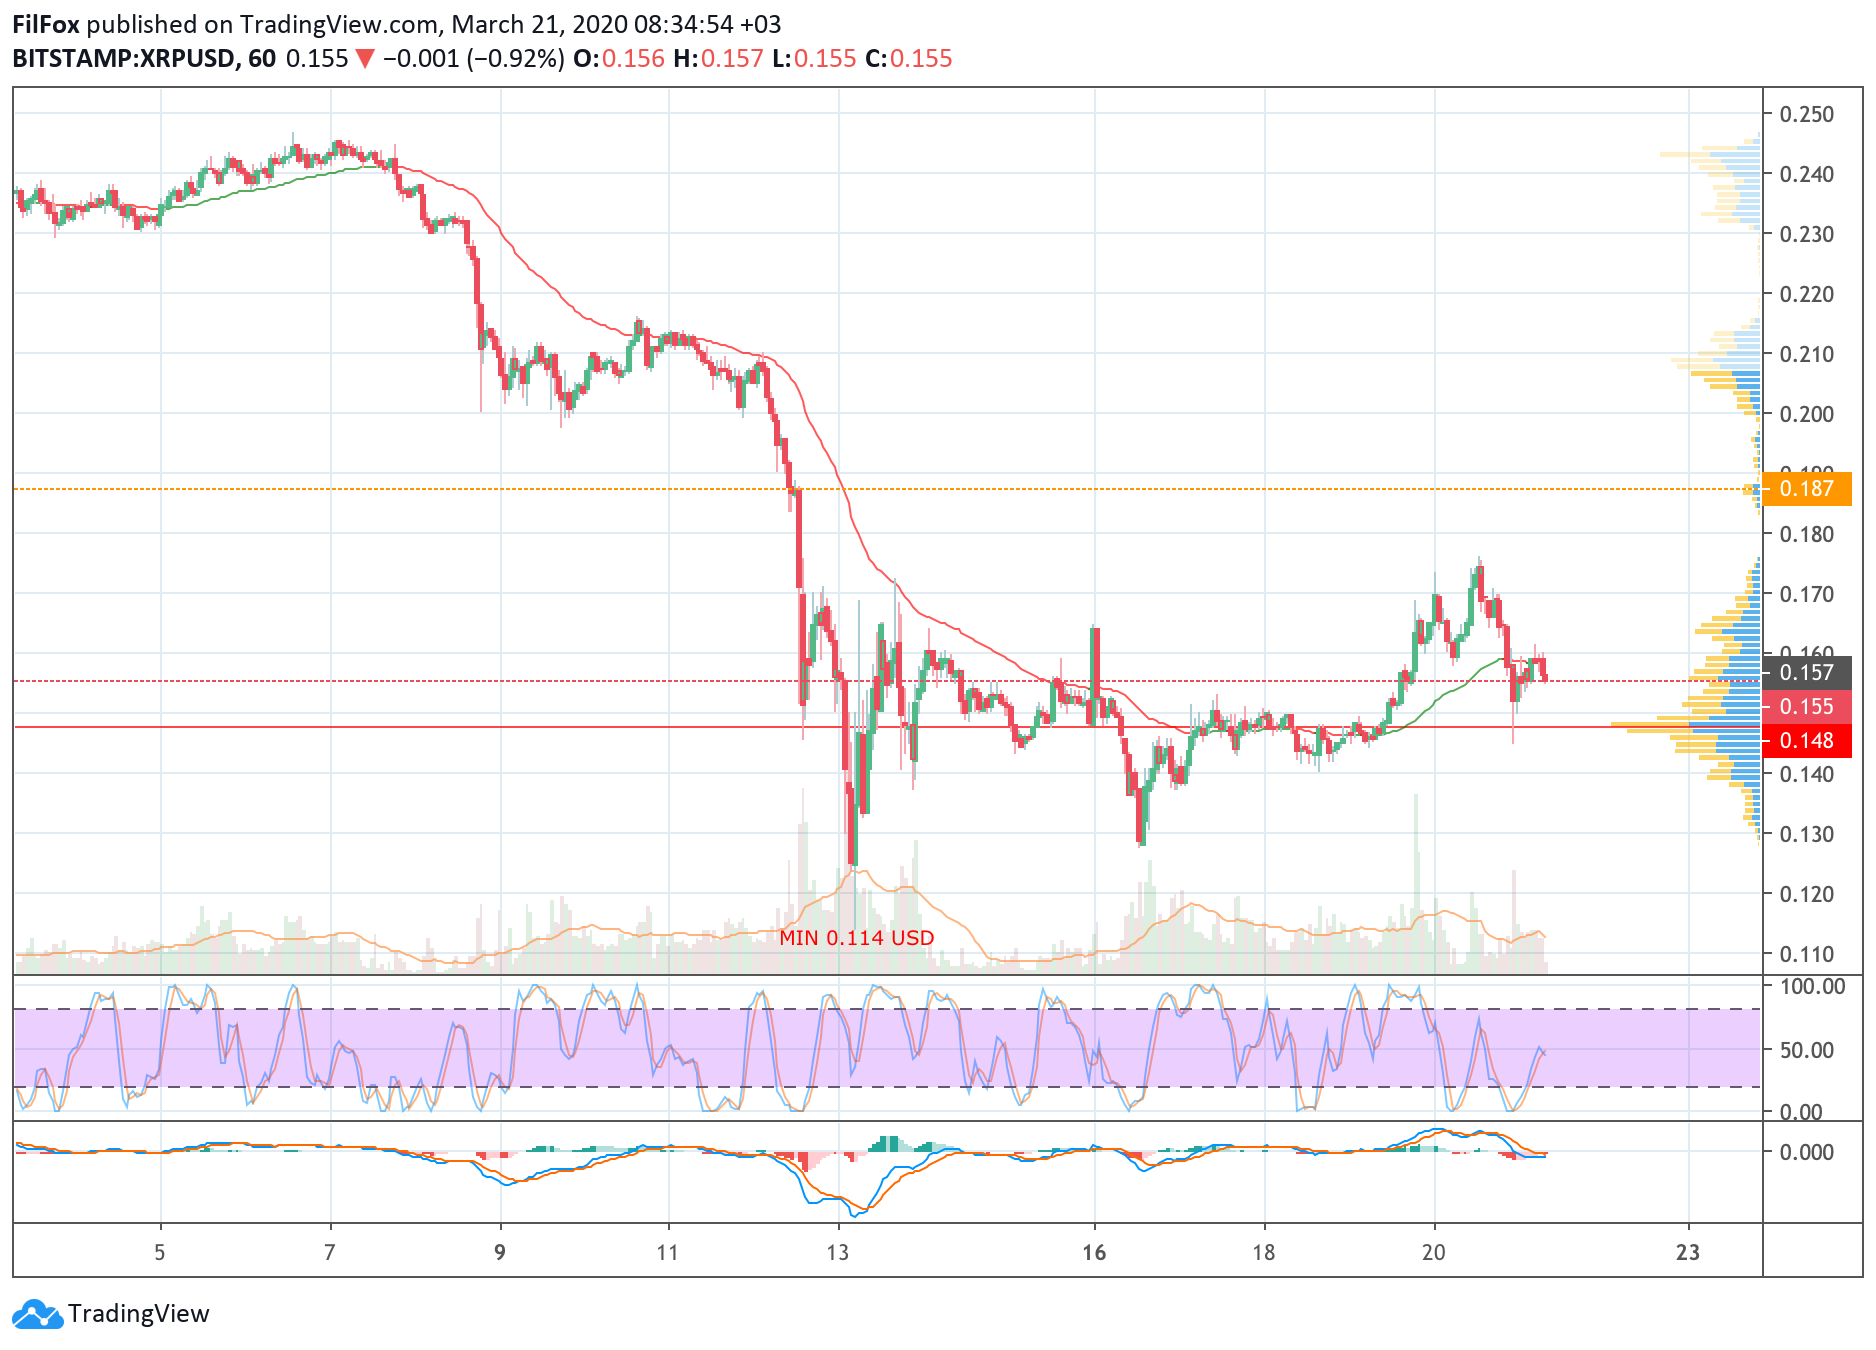 Analysis of cryptocurrency pairs BTC / USD, ETH / USD and XRP / USD on 03/21/2020